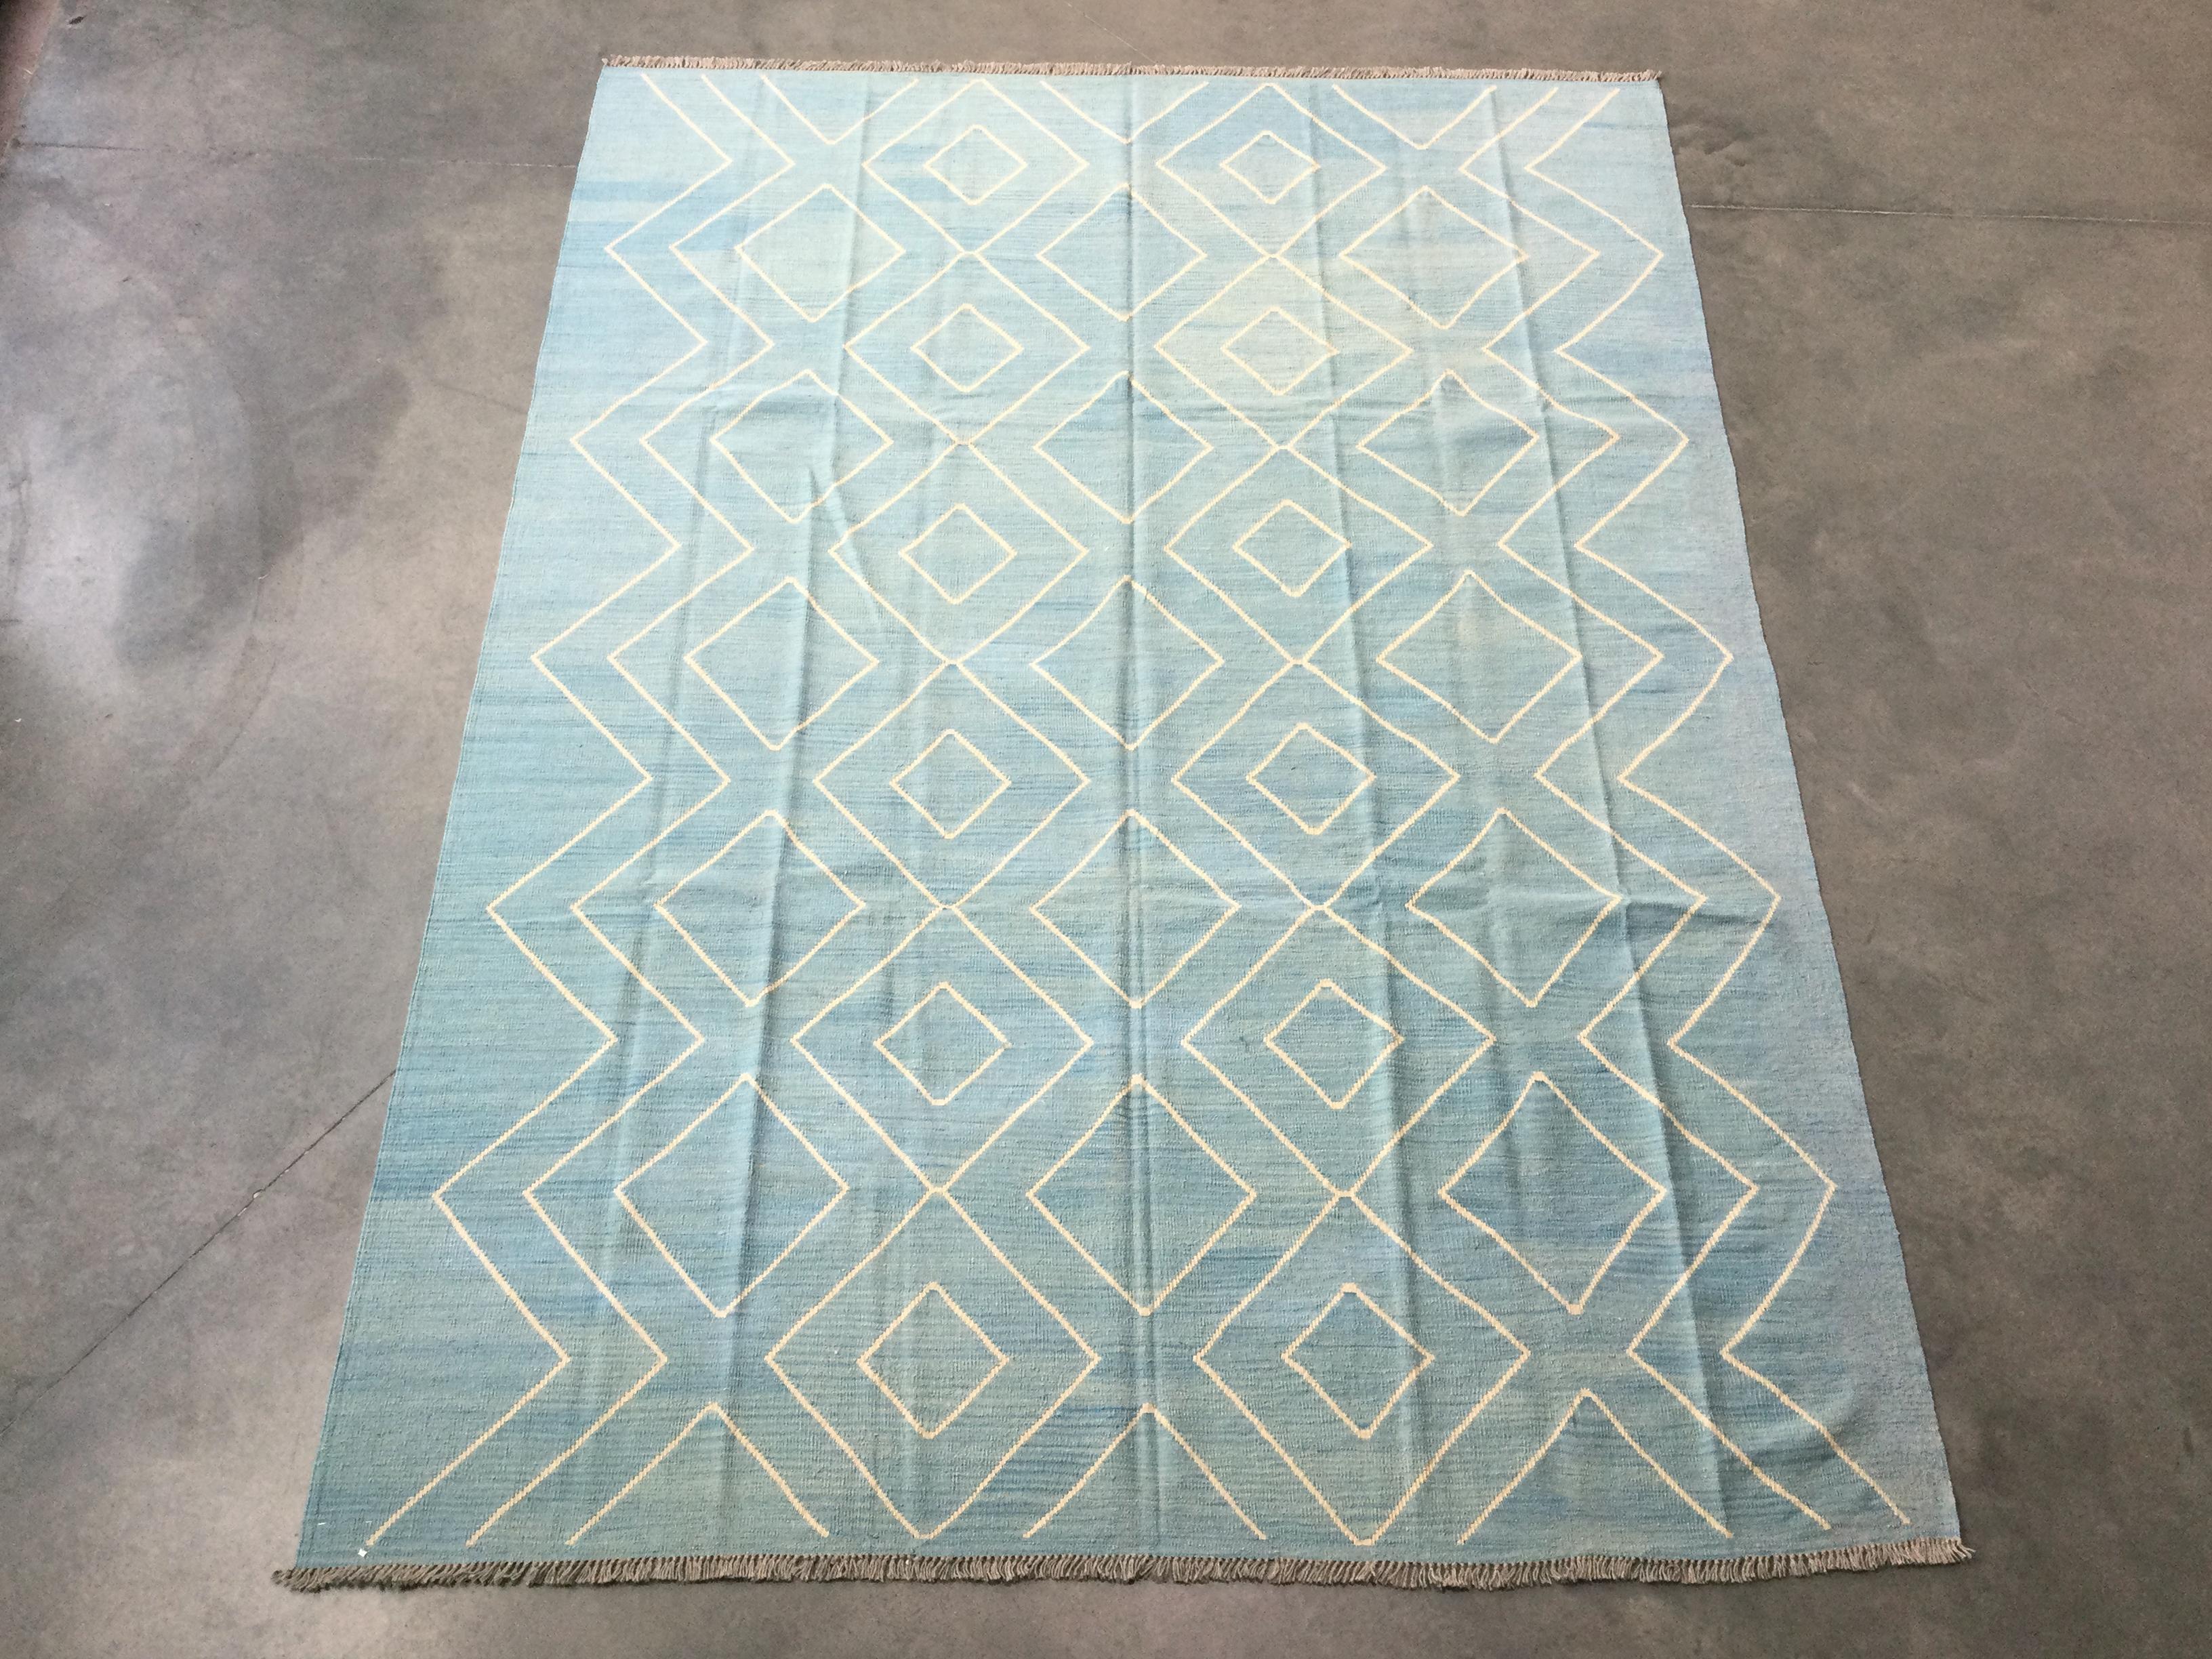 Contemporary kilim handmade in Zigler's artisan workshops in Pakistan.
- As they do not have edges, this type of pieces will be perfectly centered in a decorative environment.
- Soft, calm and will bring a touch of warmth to the room without